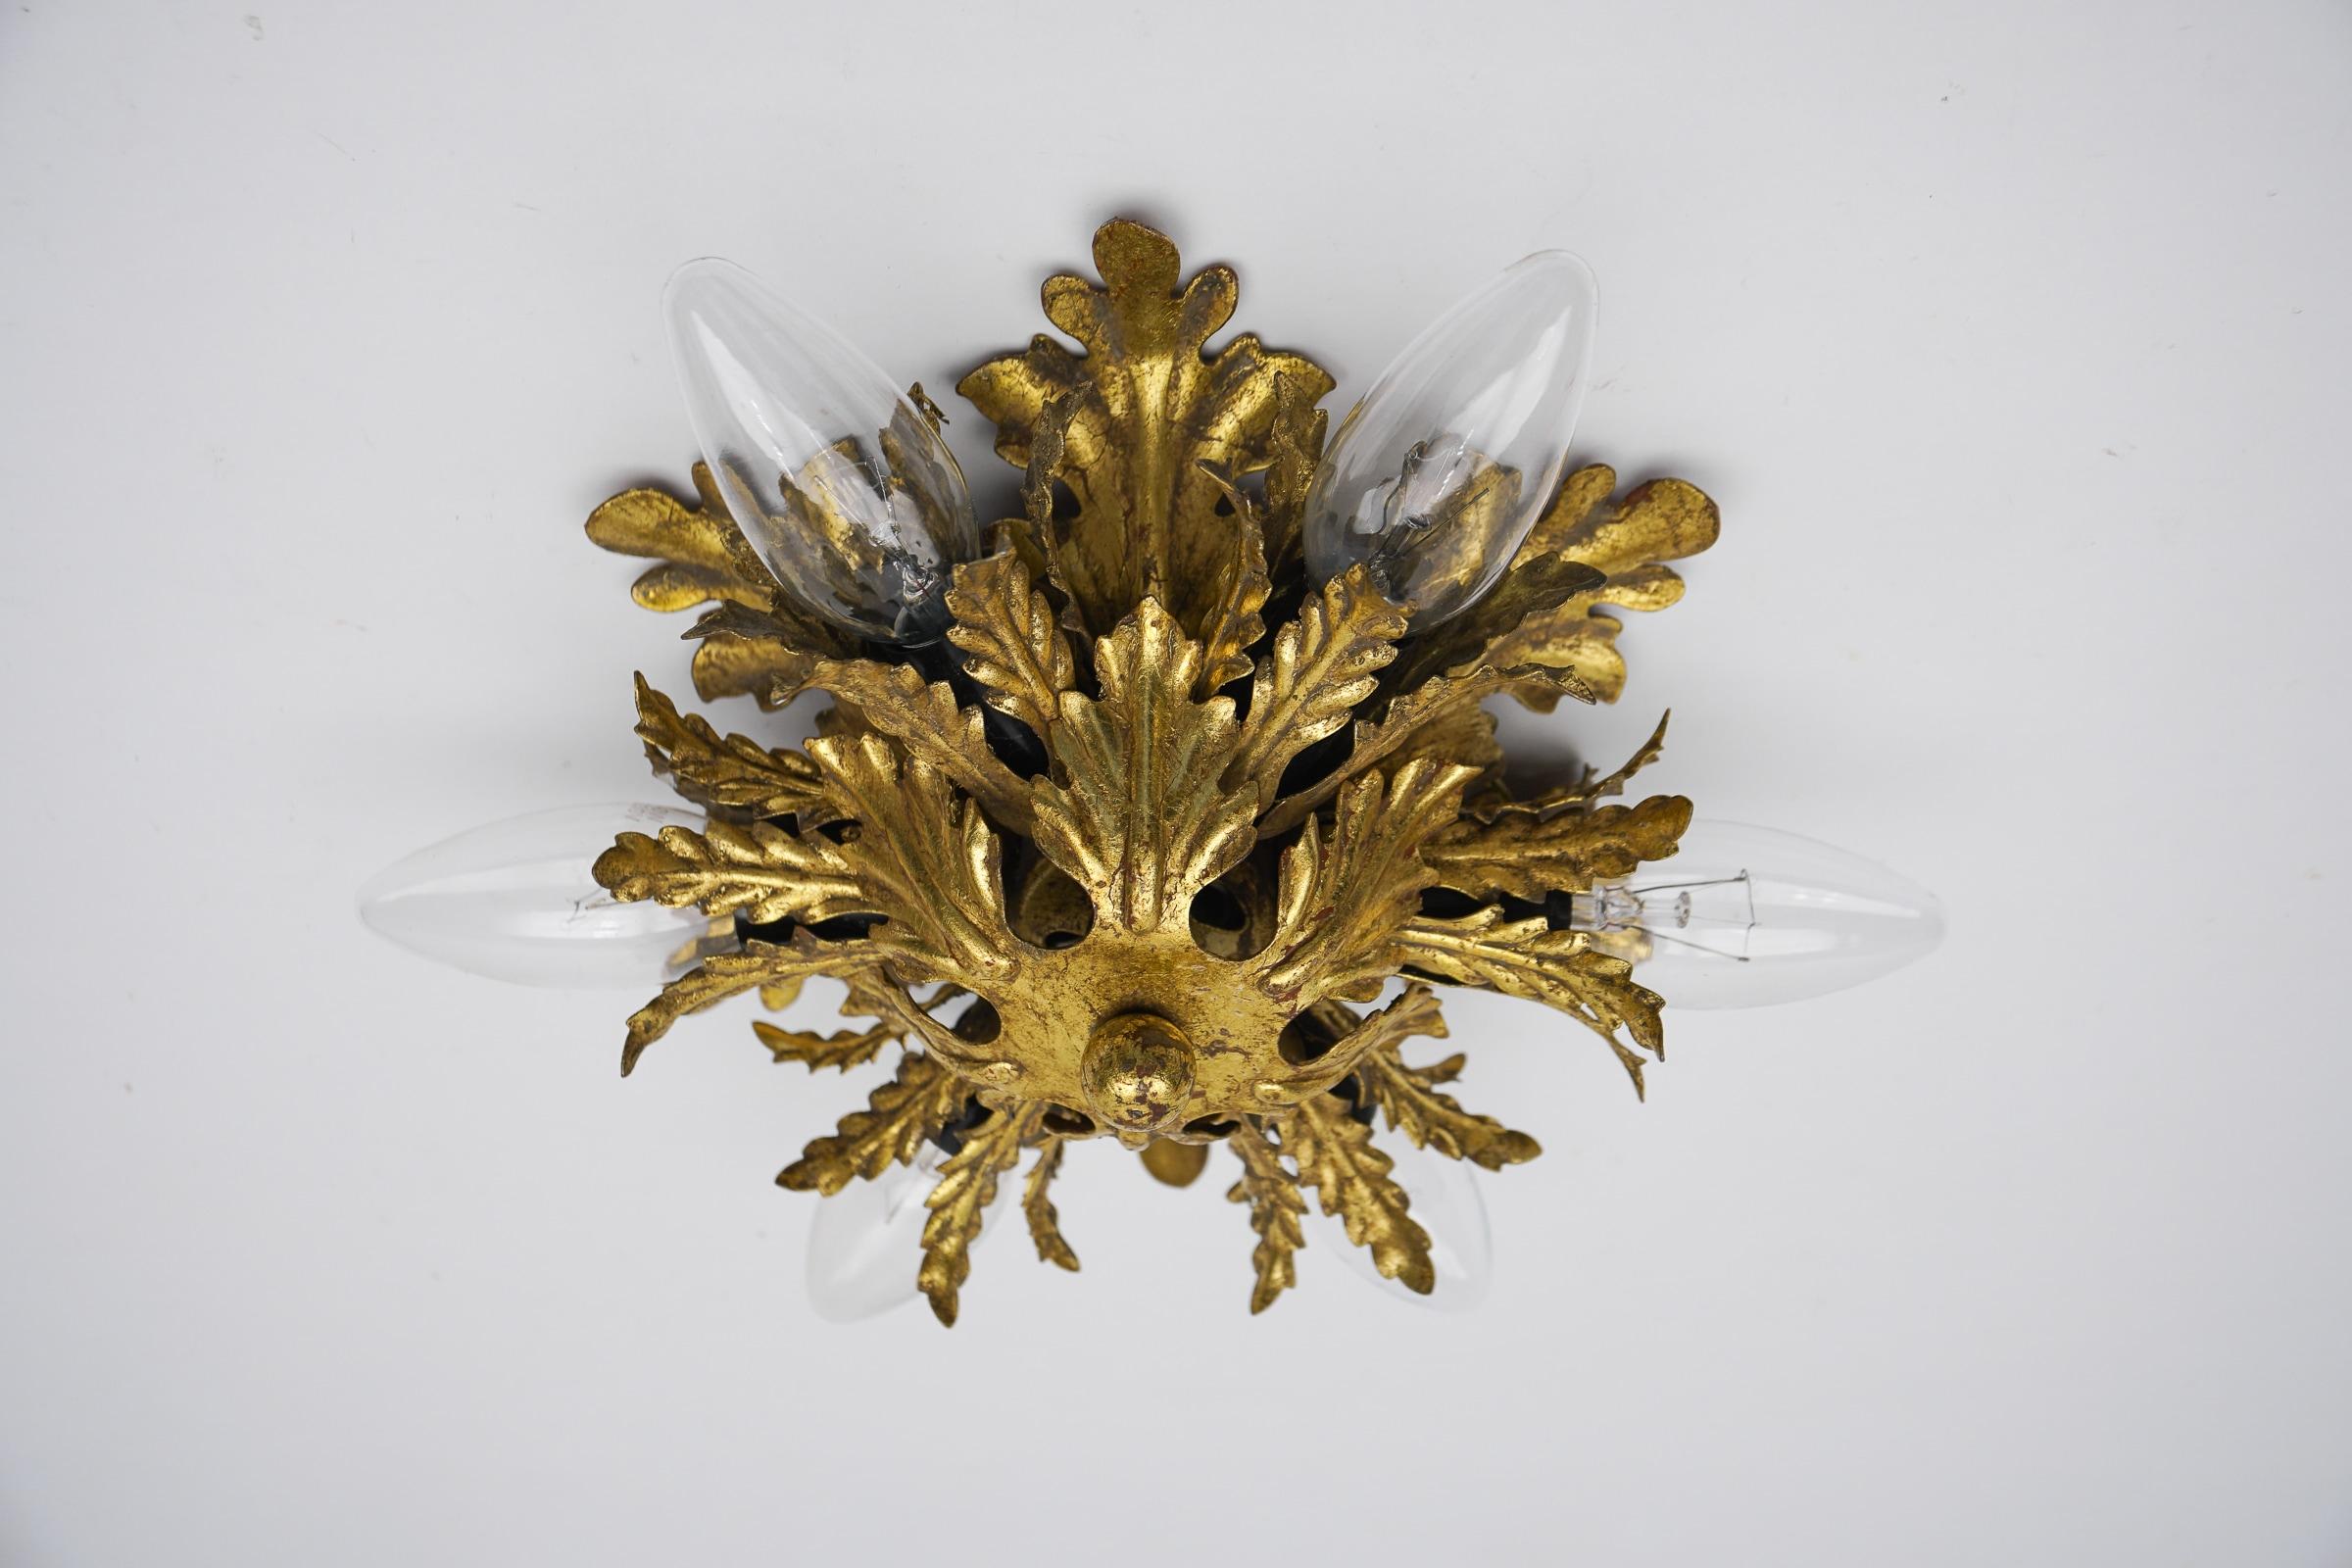 Italian Florentine Ceiling Lamp by Banci Firenze in Gold, 1960s For Sale